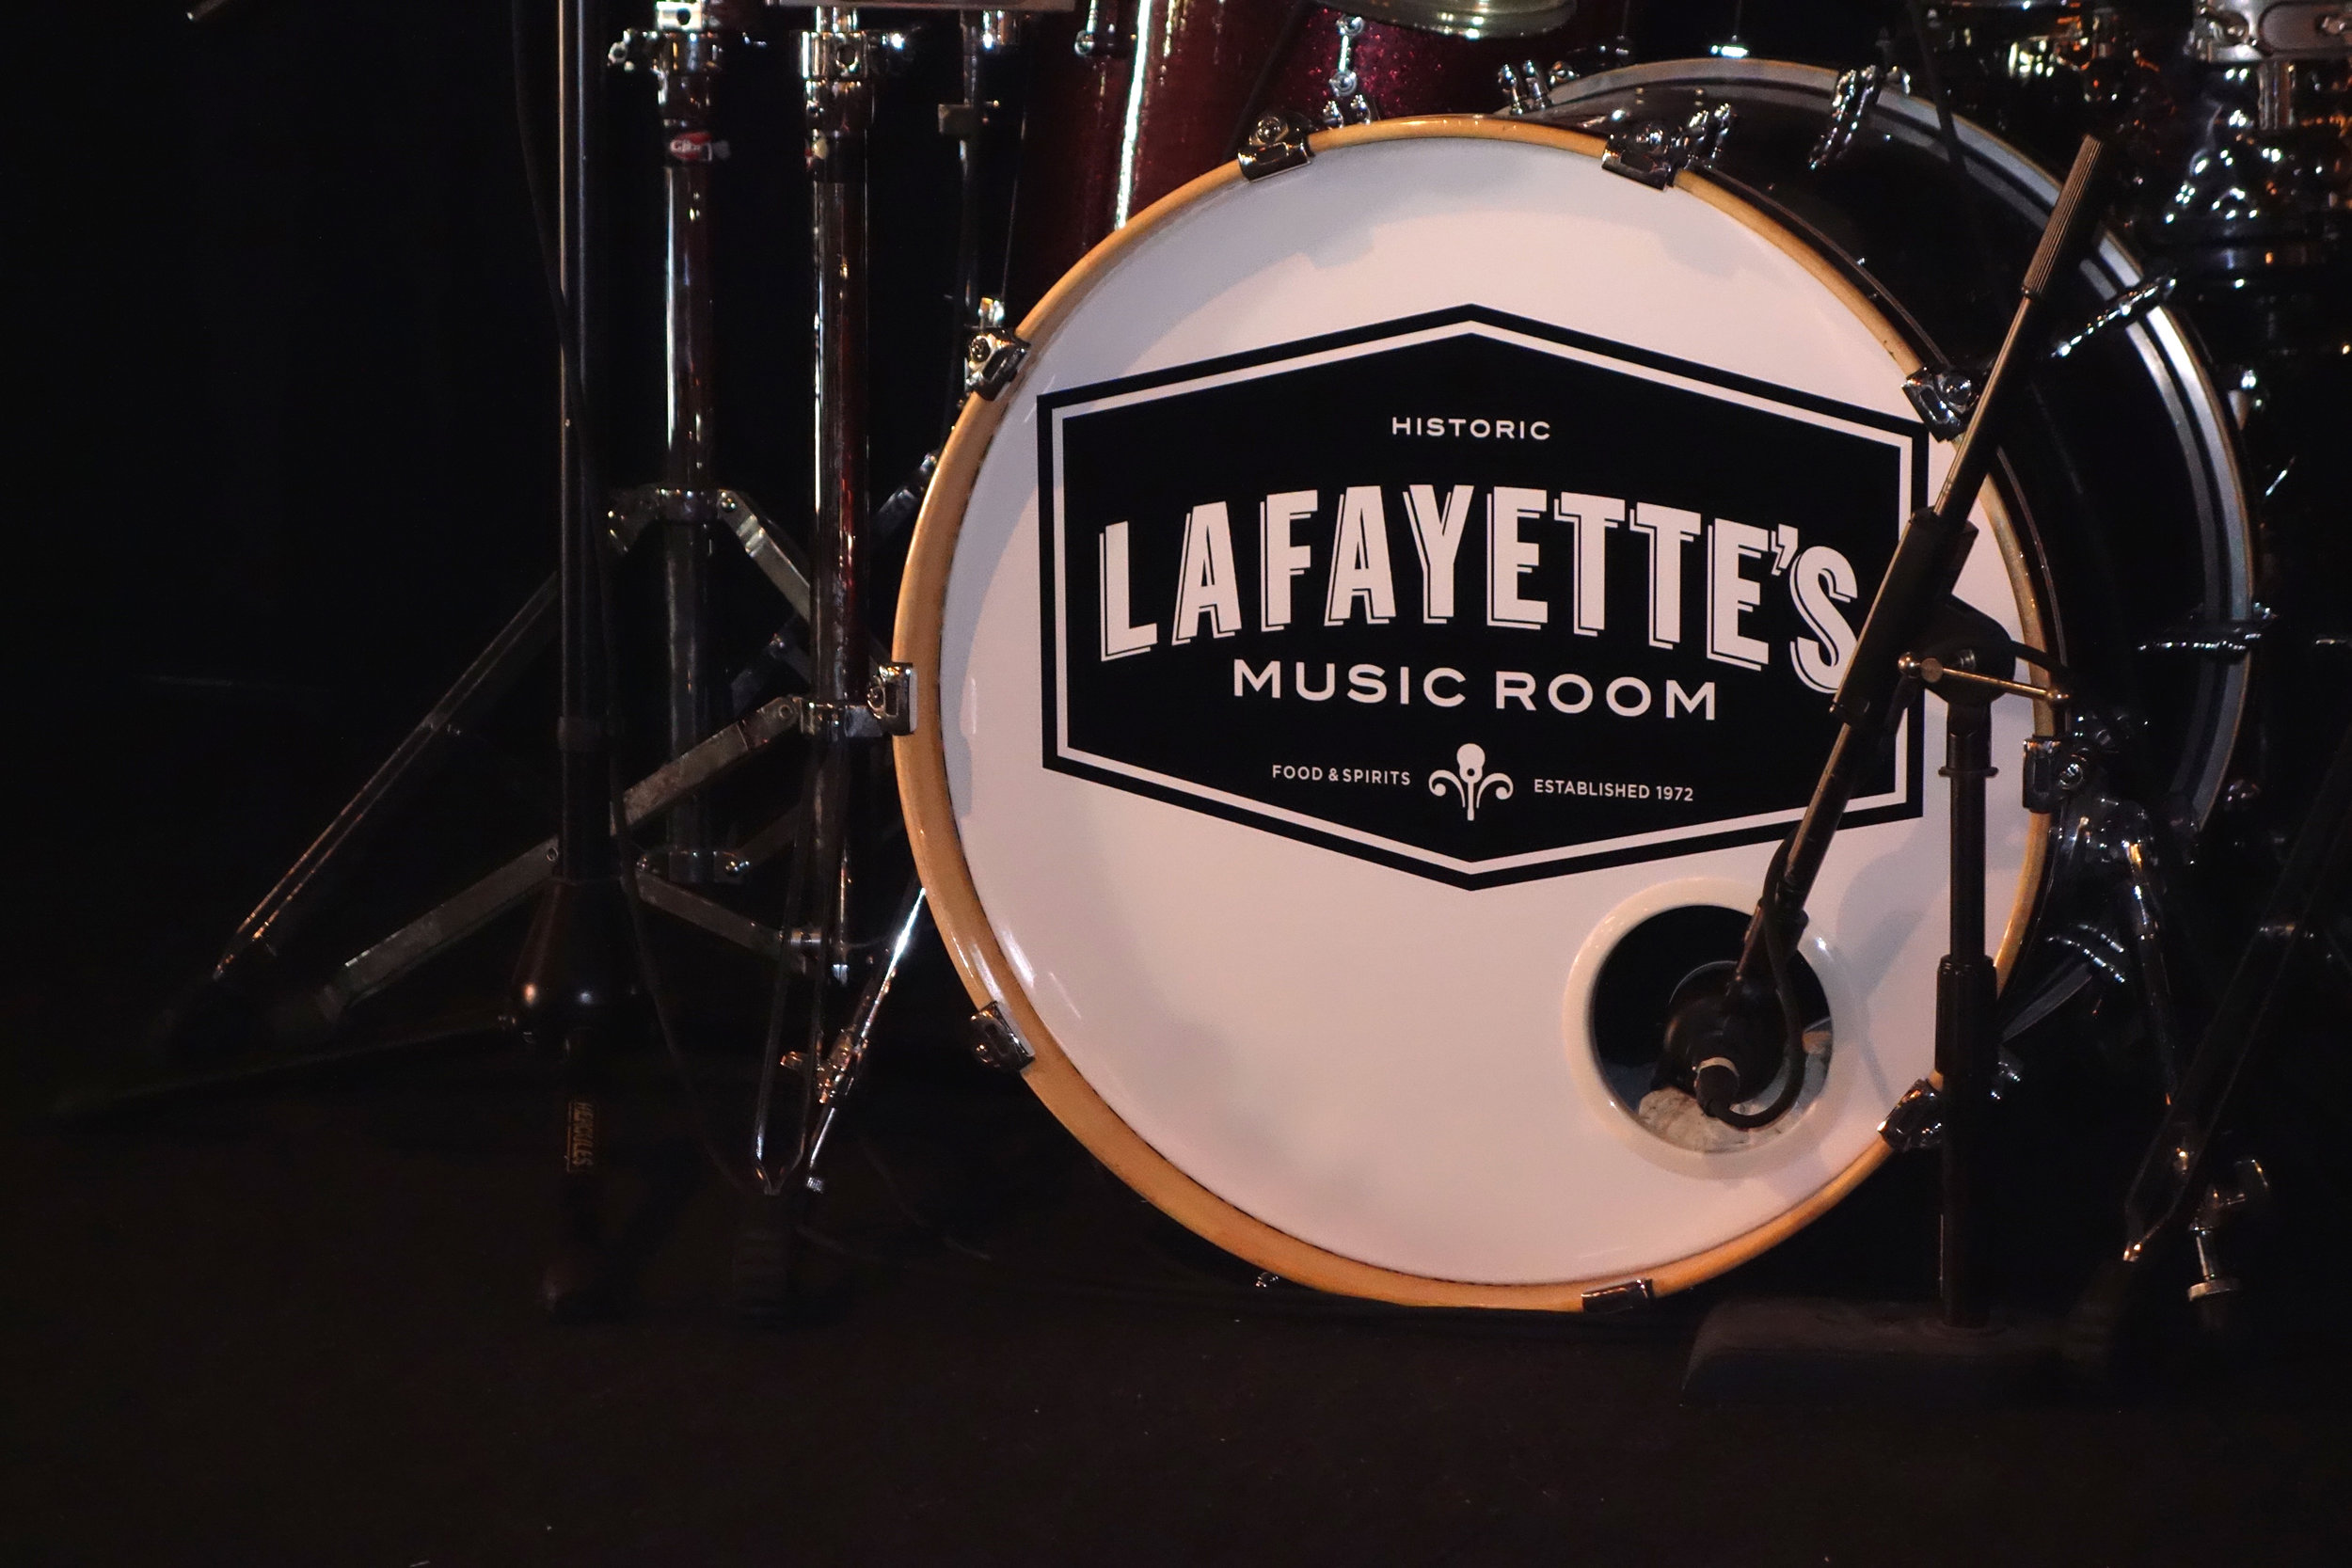  Lafayette’s Music Room  Branded logo drum kit  Creative and design by Chuck Mitchell 